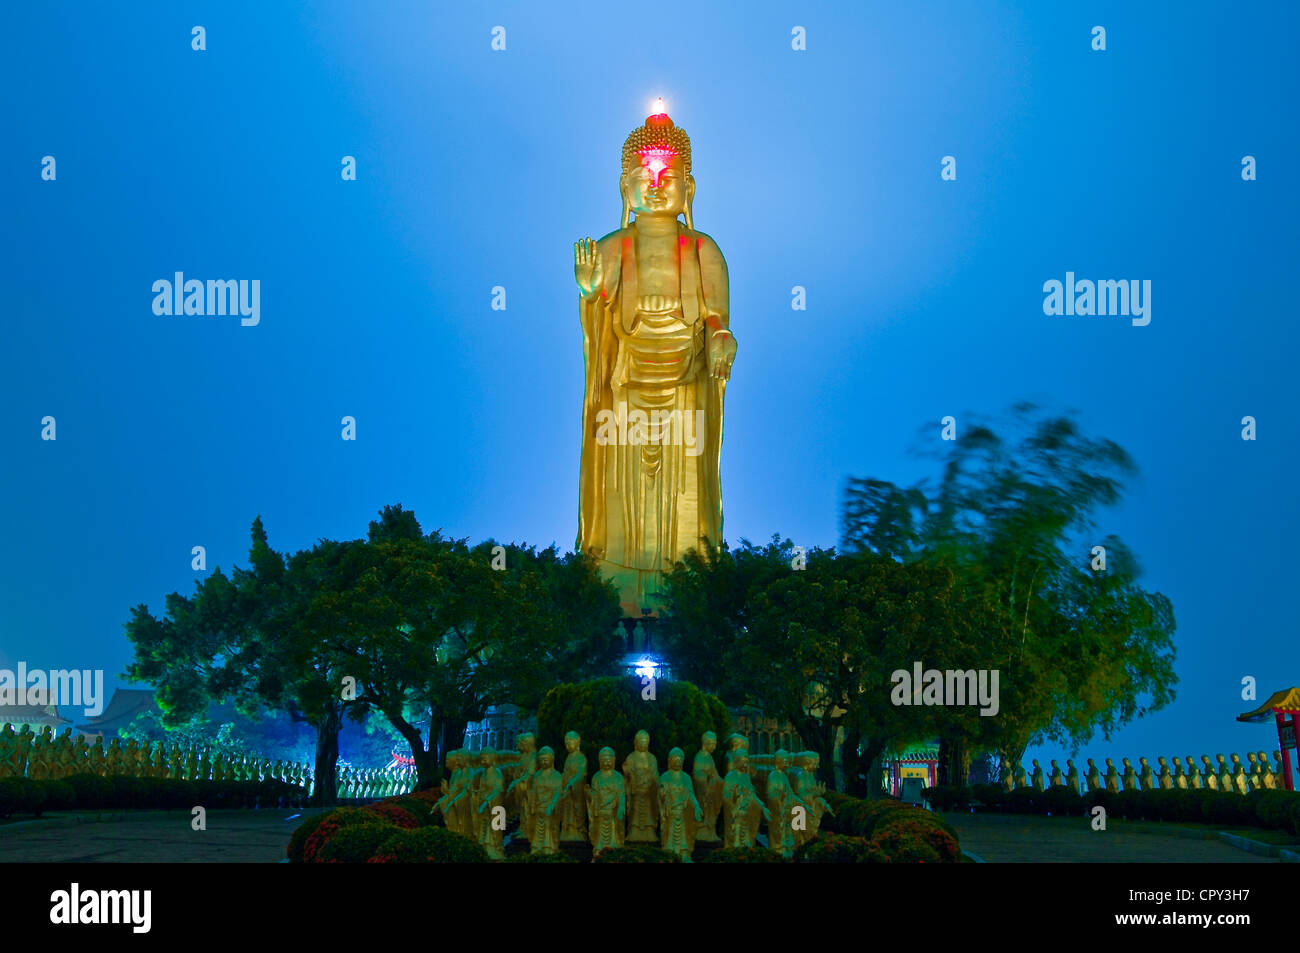 Taiwan Kaohsiung District Dashu Fo Guang Shan Buddhist Monastery the Great Buddha 40 m high and surrounded by 480 Buddha statues Stock Photo